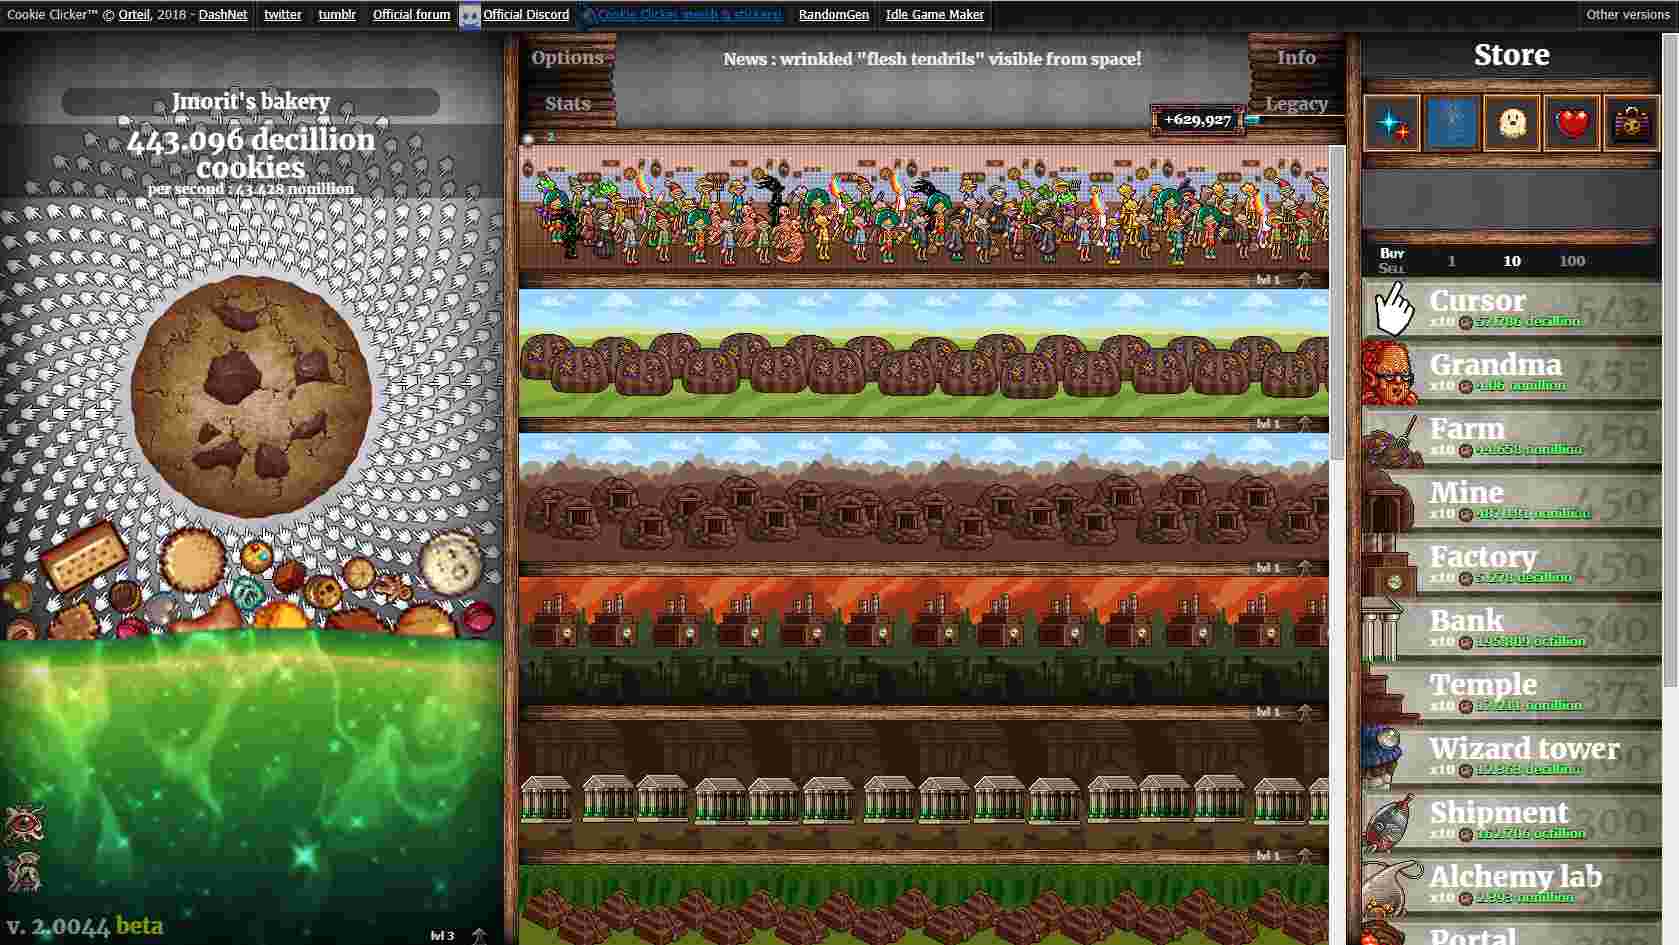 Cookie clicker unblocked game : What is it & how to play ? - DigiStatement